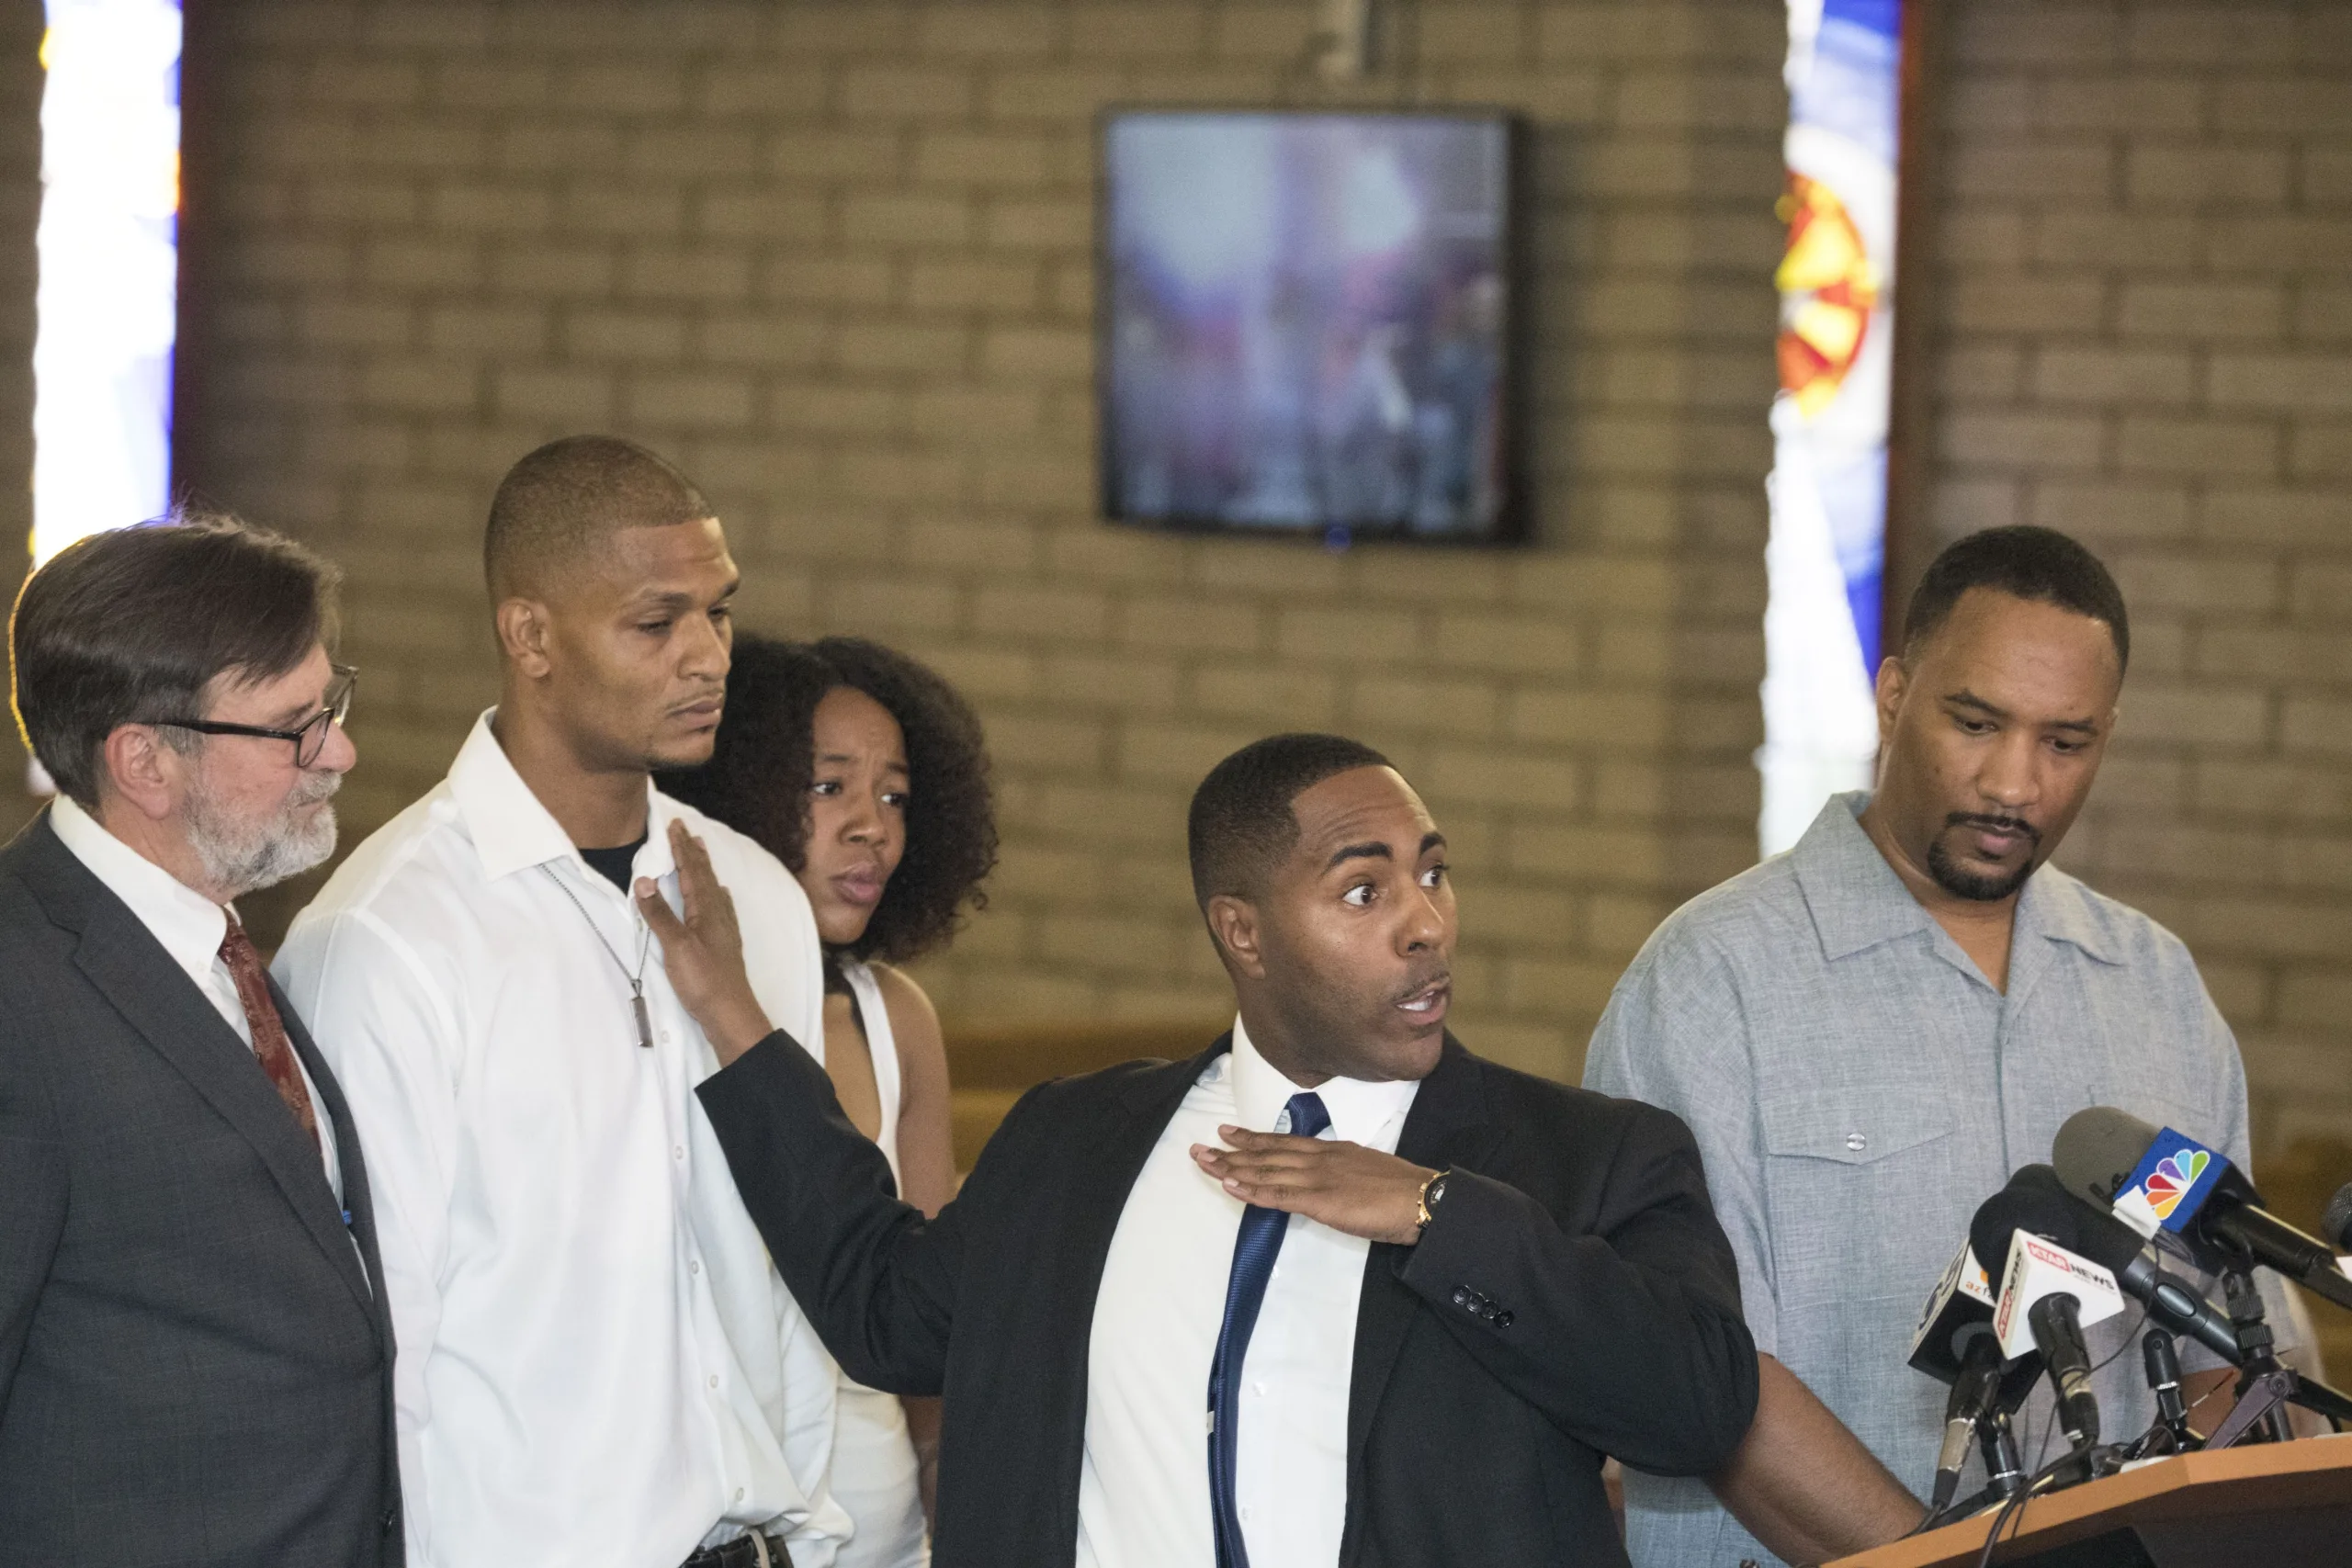 Robert Johnson, a 33-year-old man who was beaten by Mesa police officers in May, lawyer Joel Robbins (left), attorney Benjamin Taylor (center) and Pastor Andre Miller (far right) speak at New Beginnings Christian Church in Mesa on June 7, 2018.